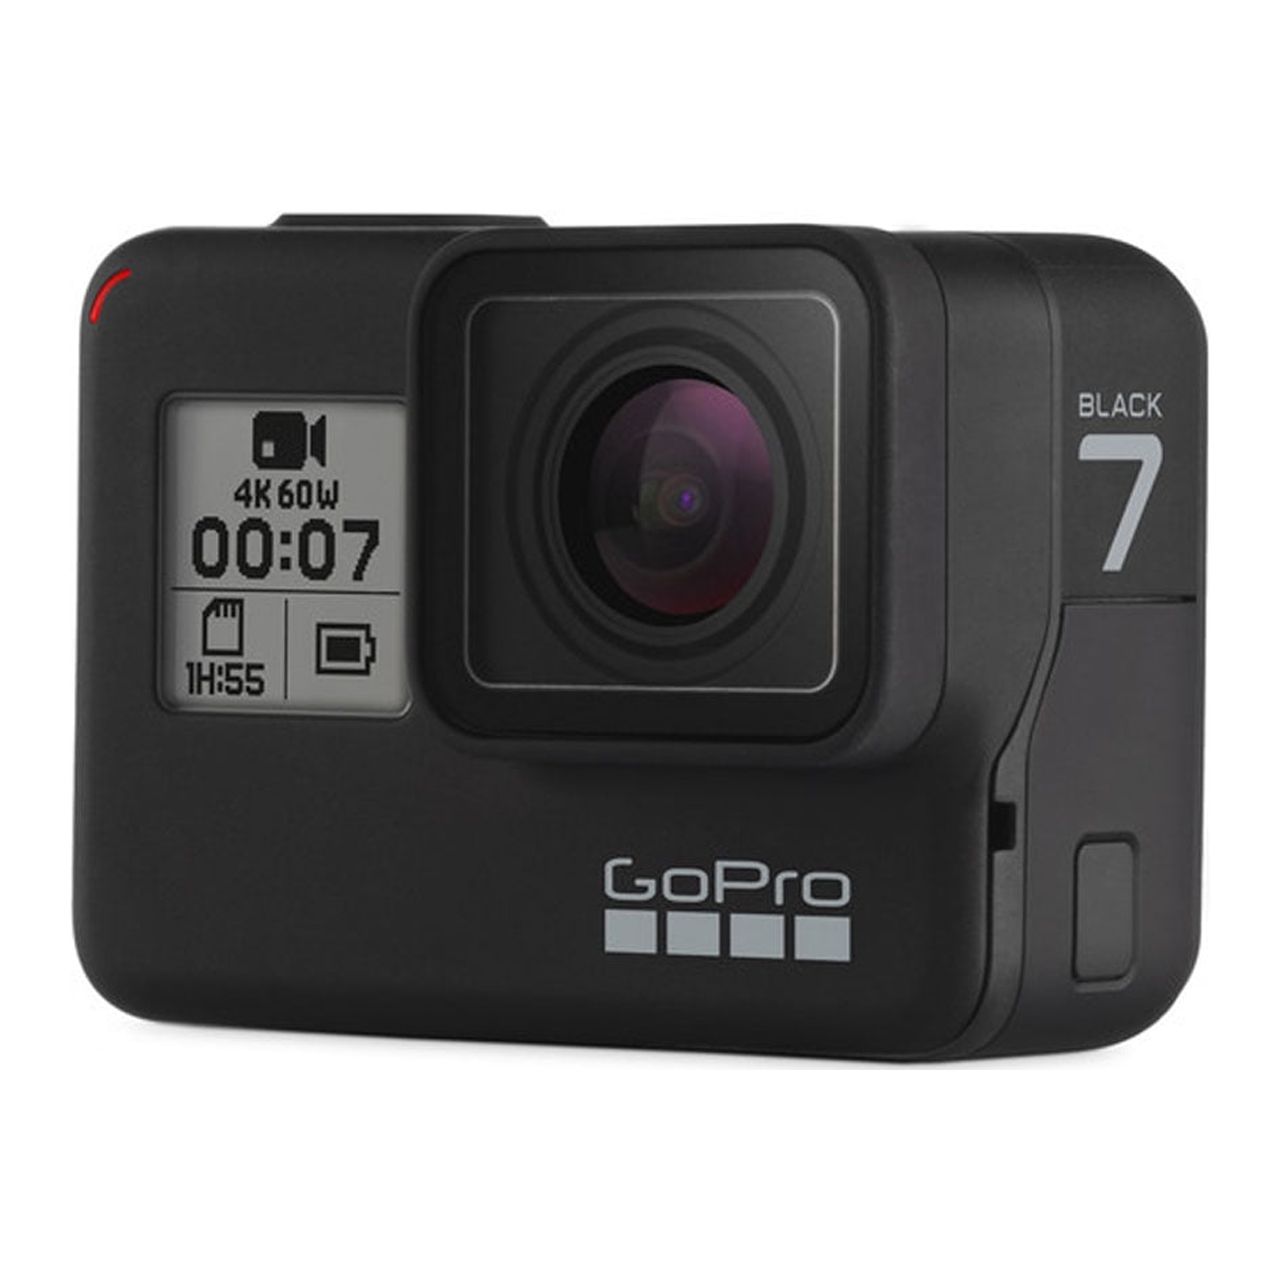 GoPro HERO7 Black Waterproof Action Camera with Touch Screen 4K HD Video 12MP Photos Live Streaming (Newest Model) - image 5 of 7